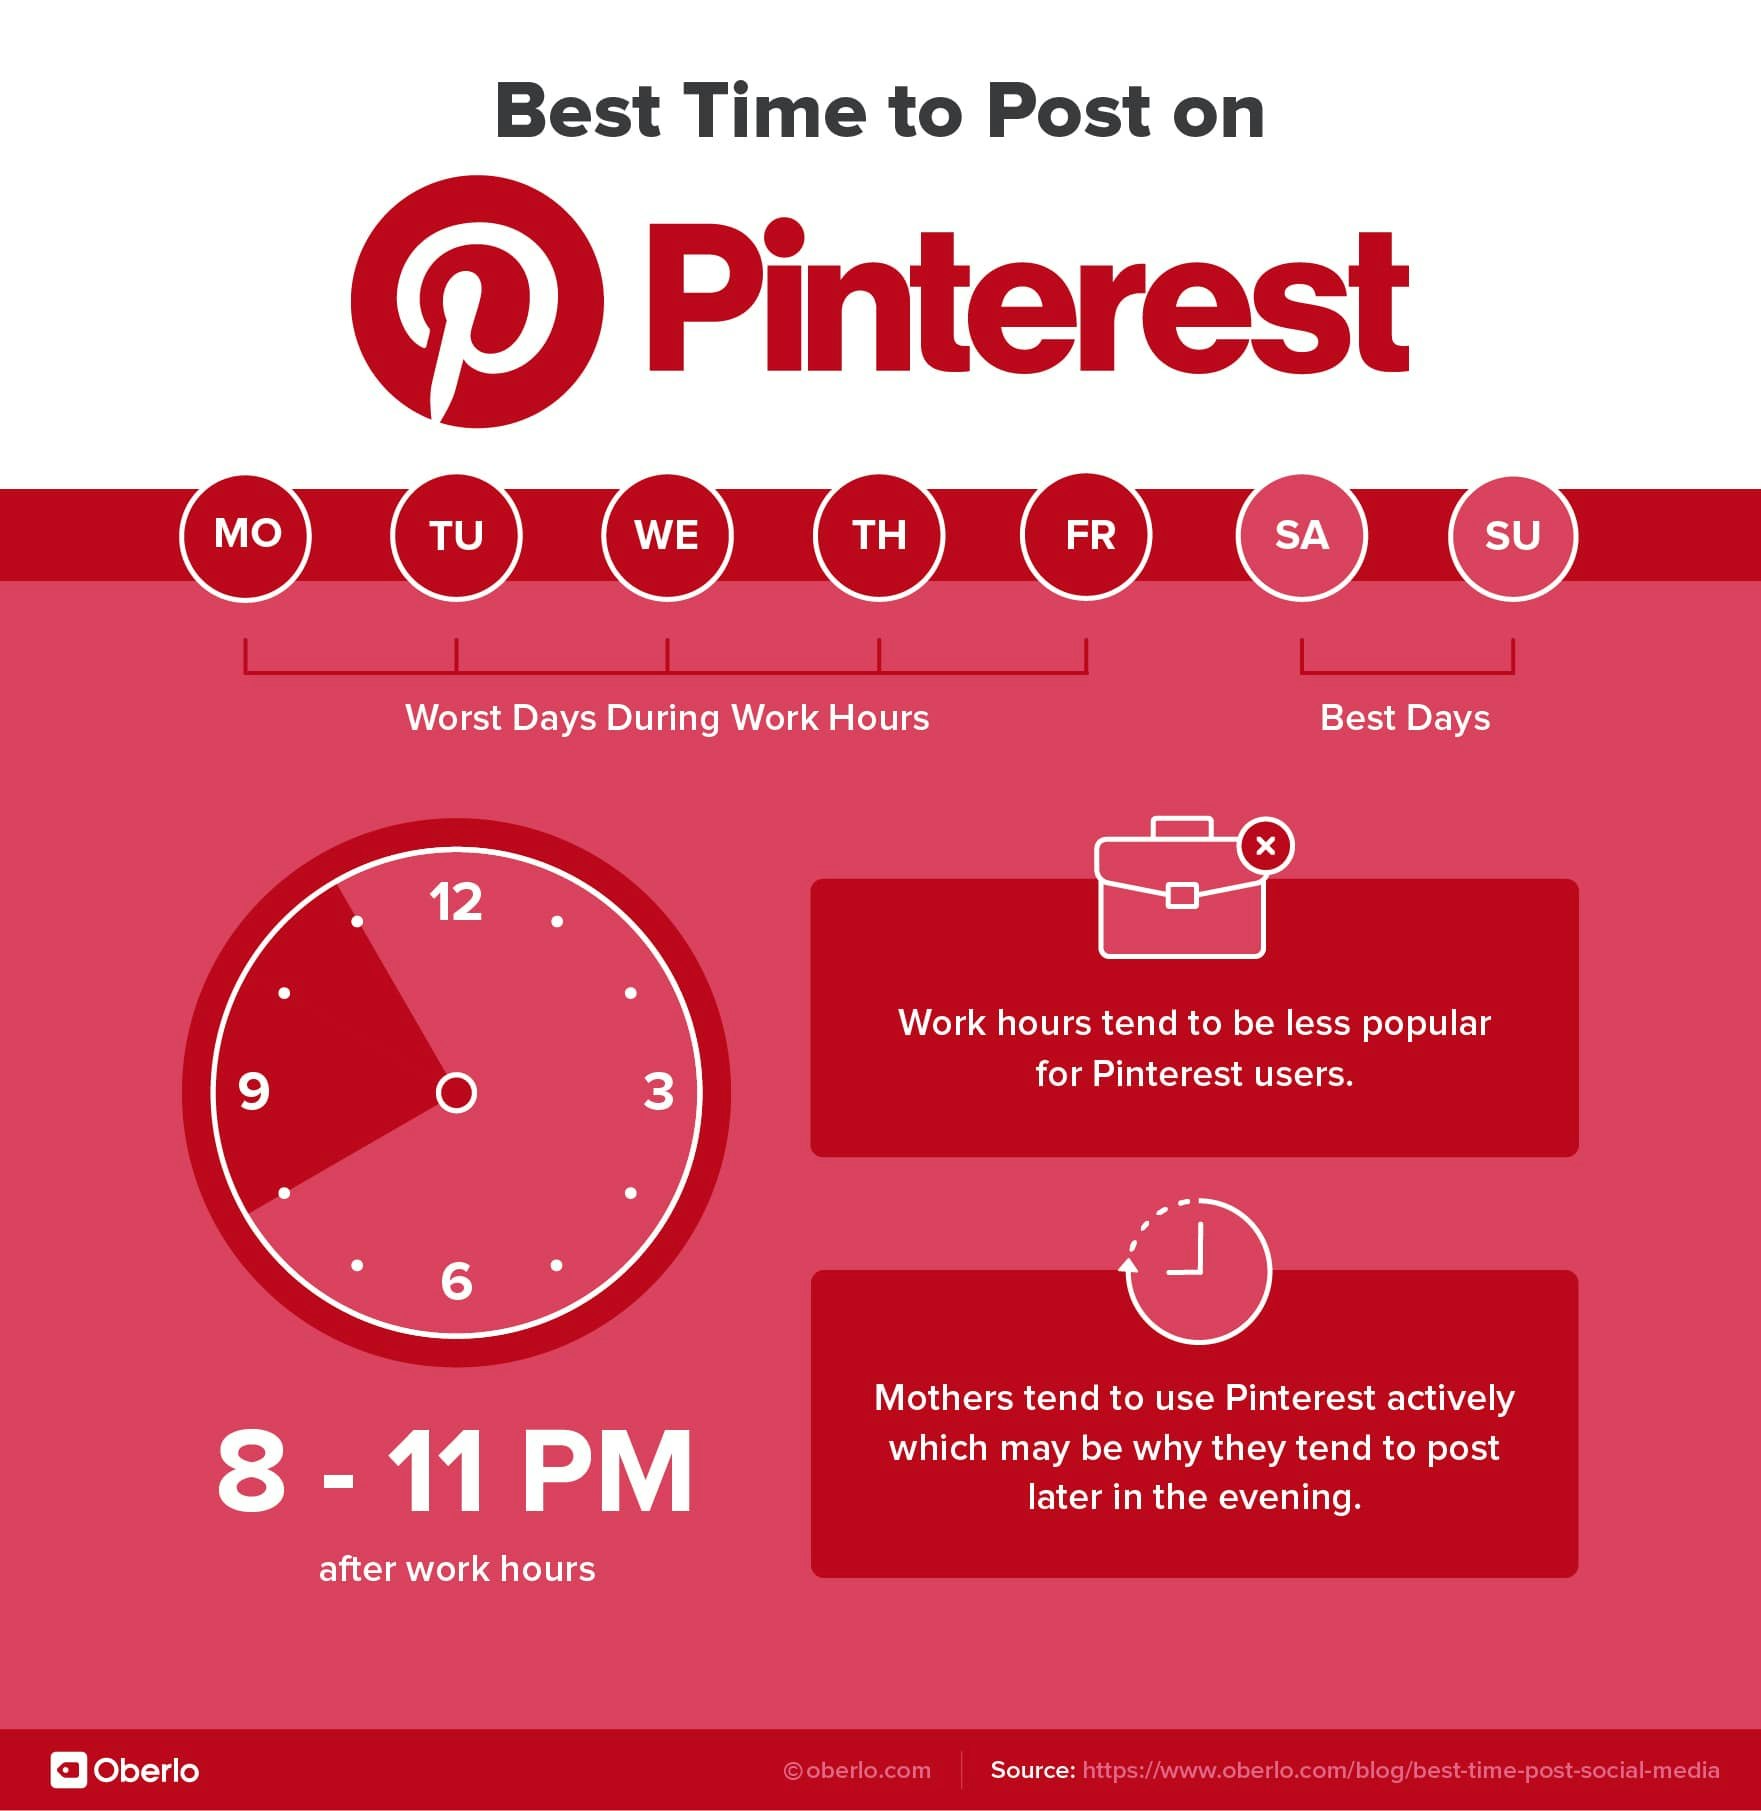 Best time to post on Pinterest 